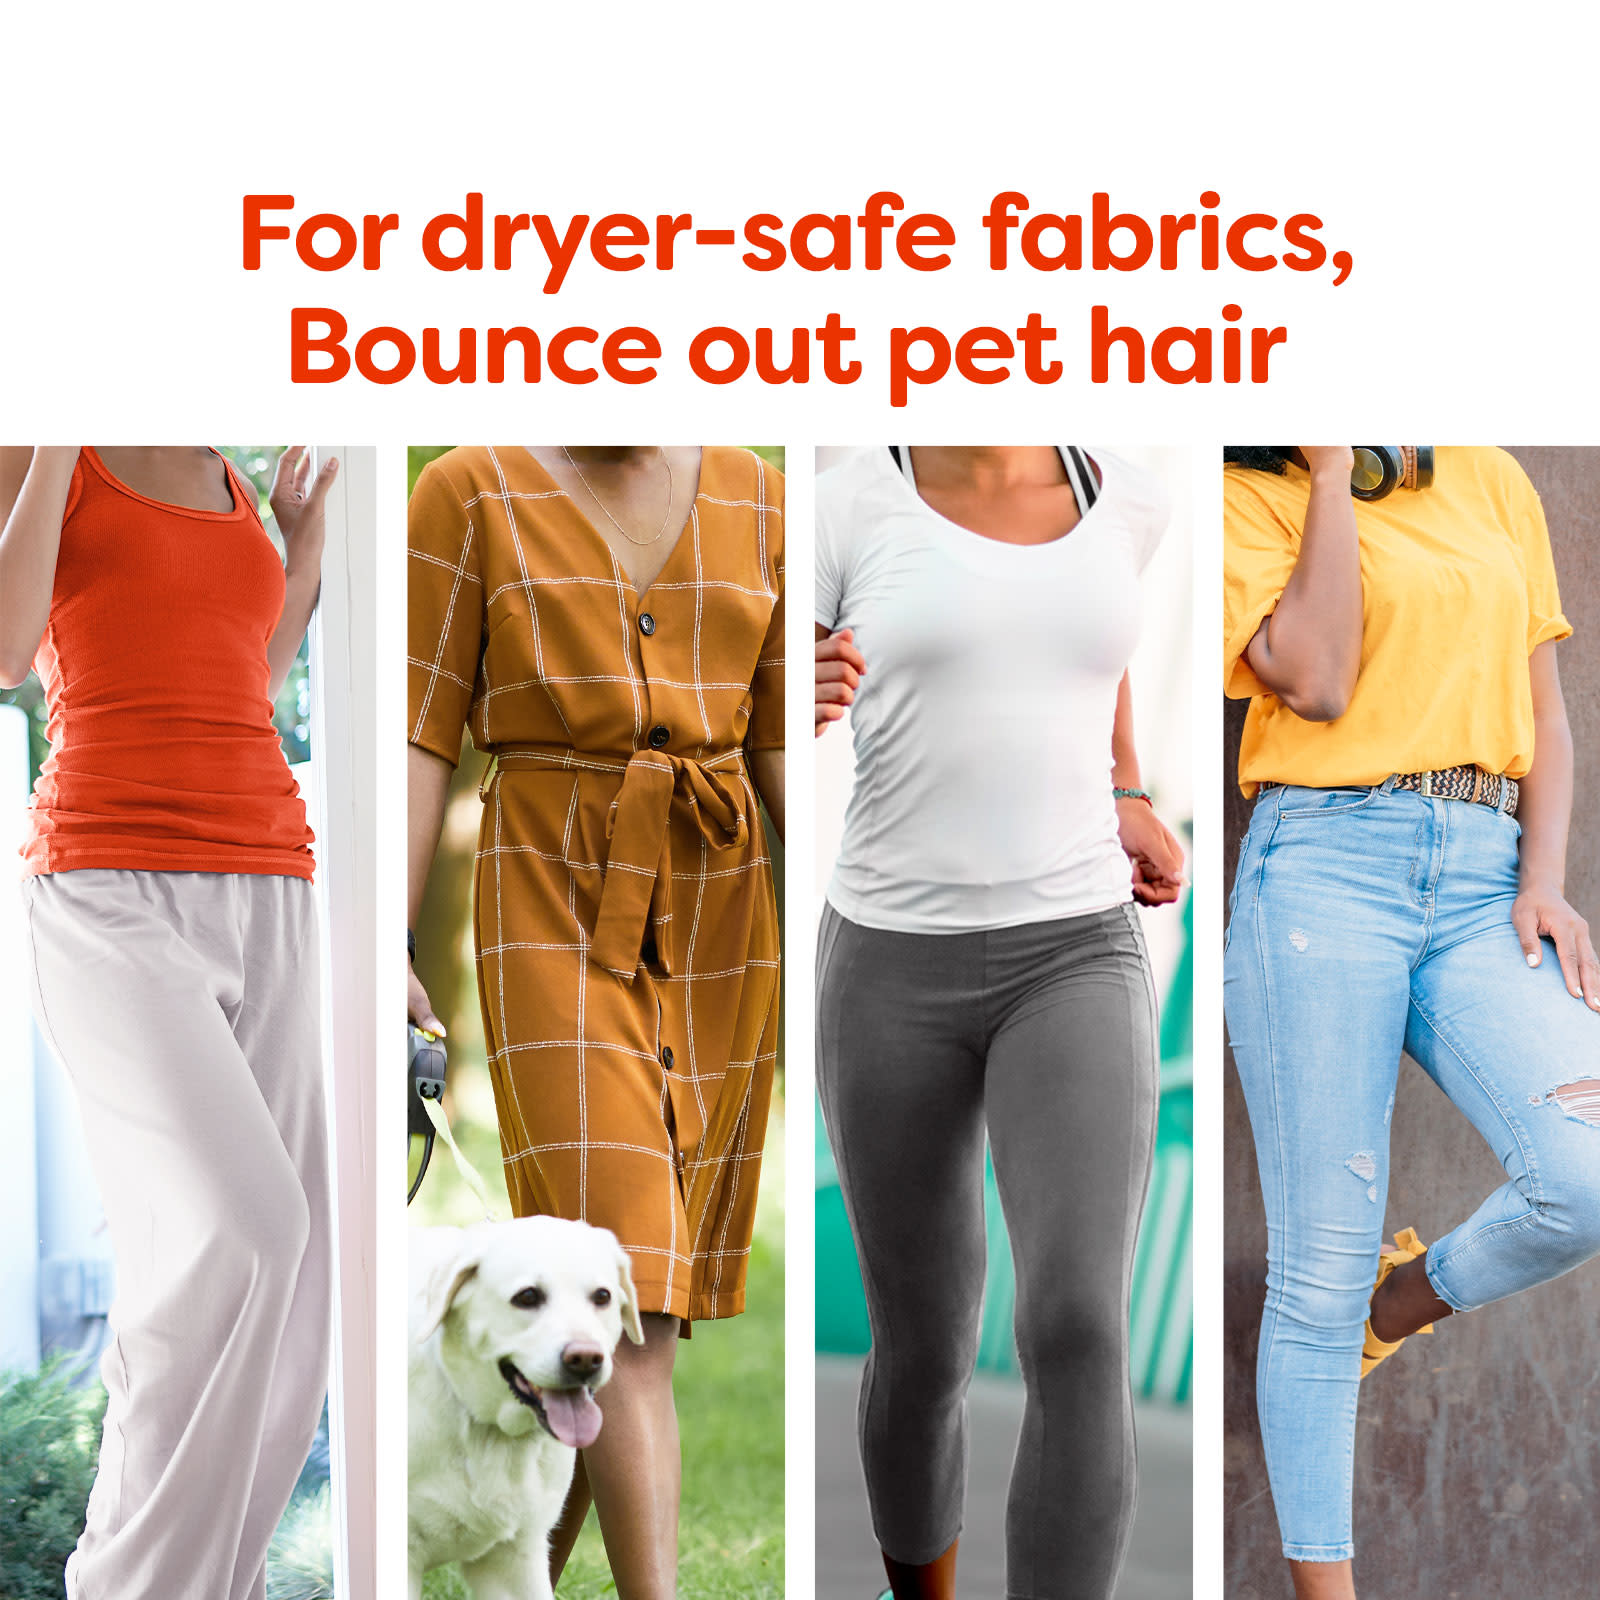 Bounce Pet Hair Dryer Sheets: For dryer-safe fabrics, Bounce out pet hair